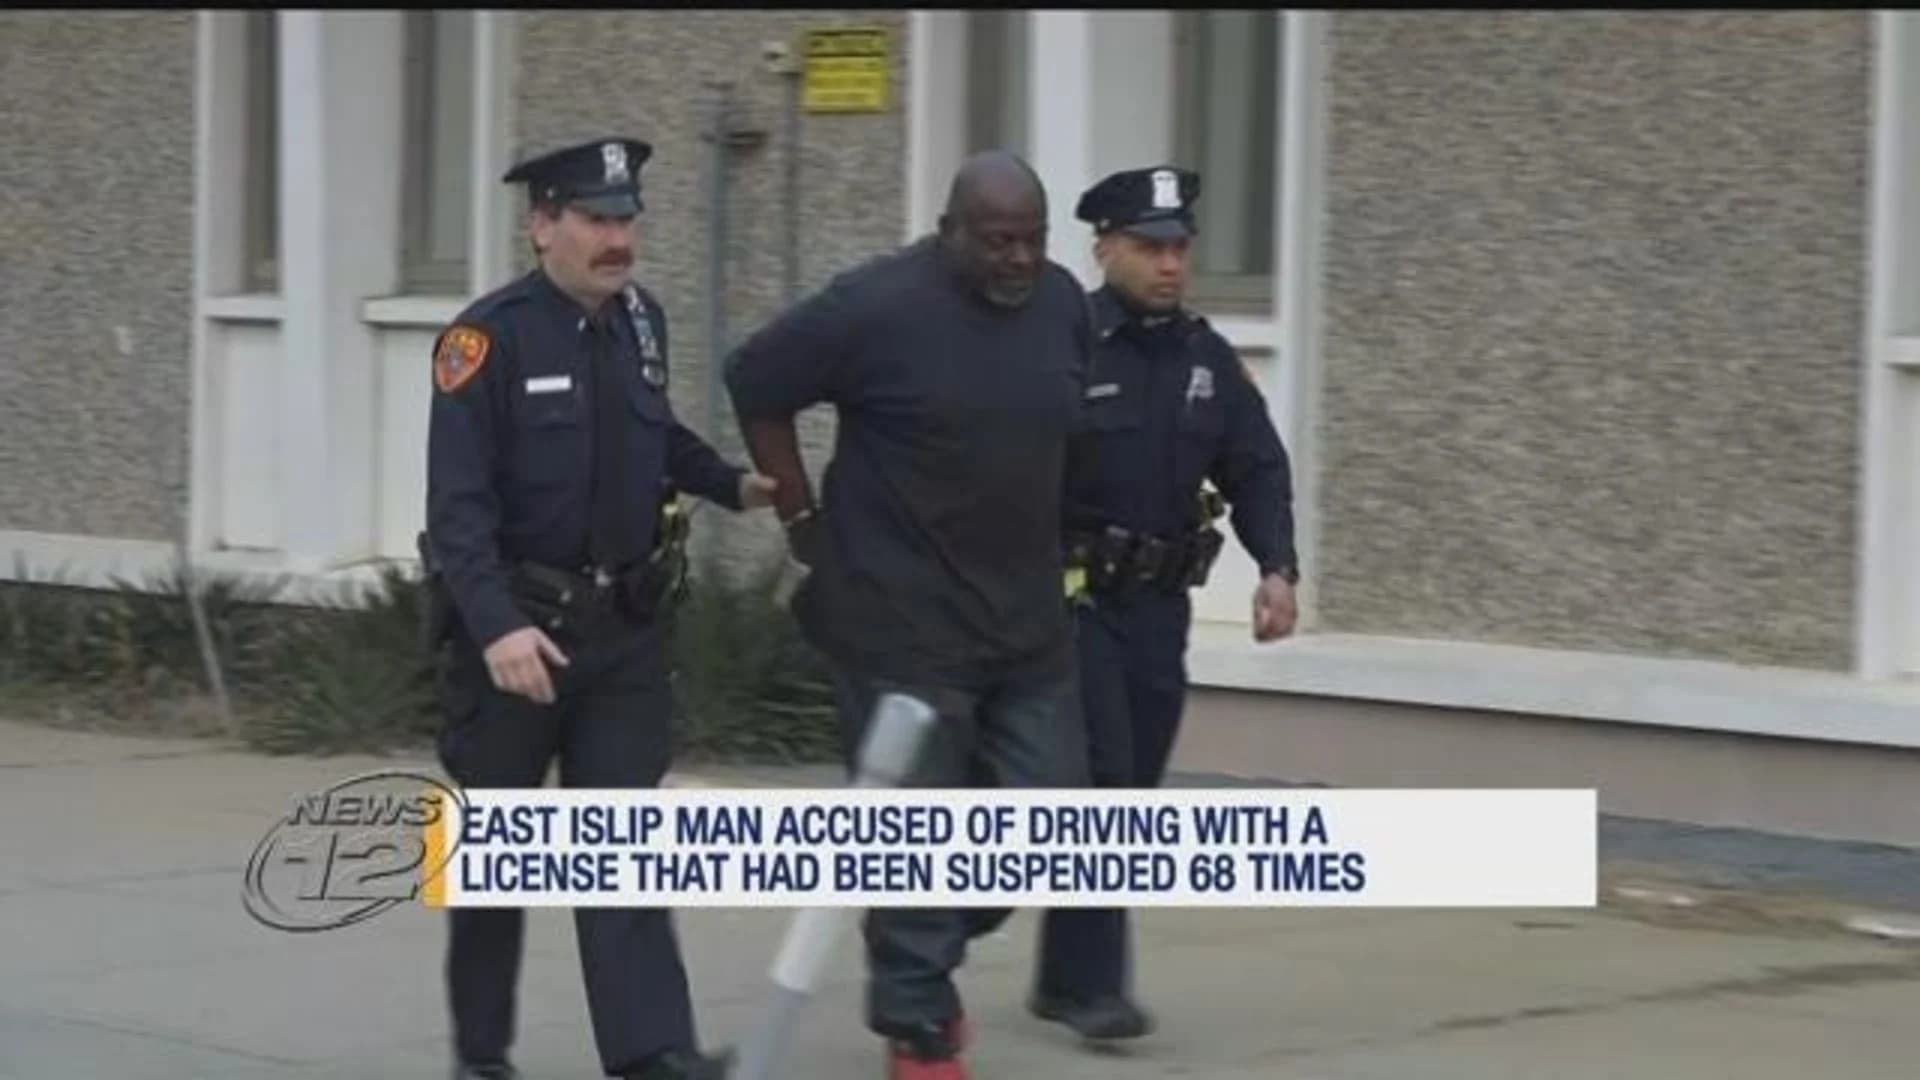 Officials: East Islip man accused of driving with license suspended 68 times